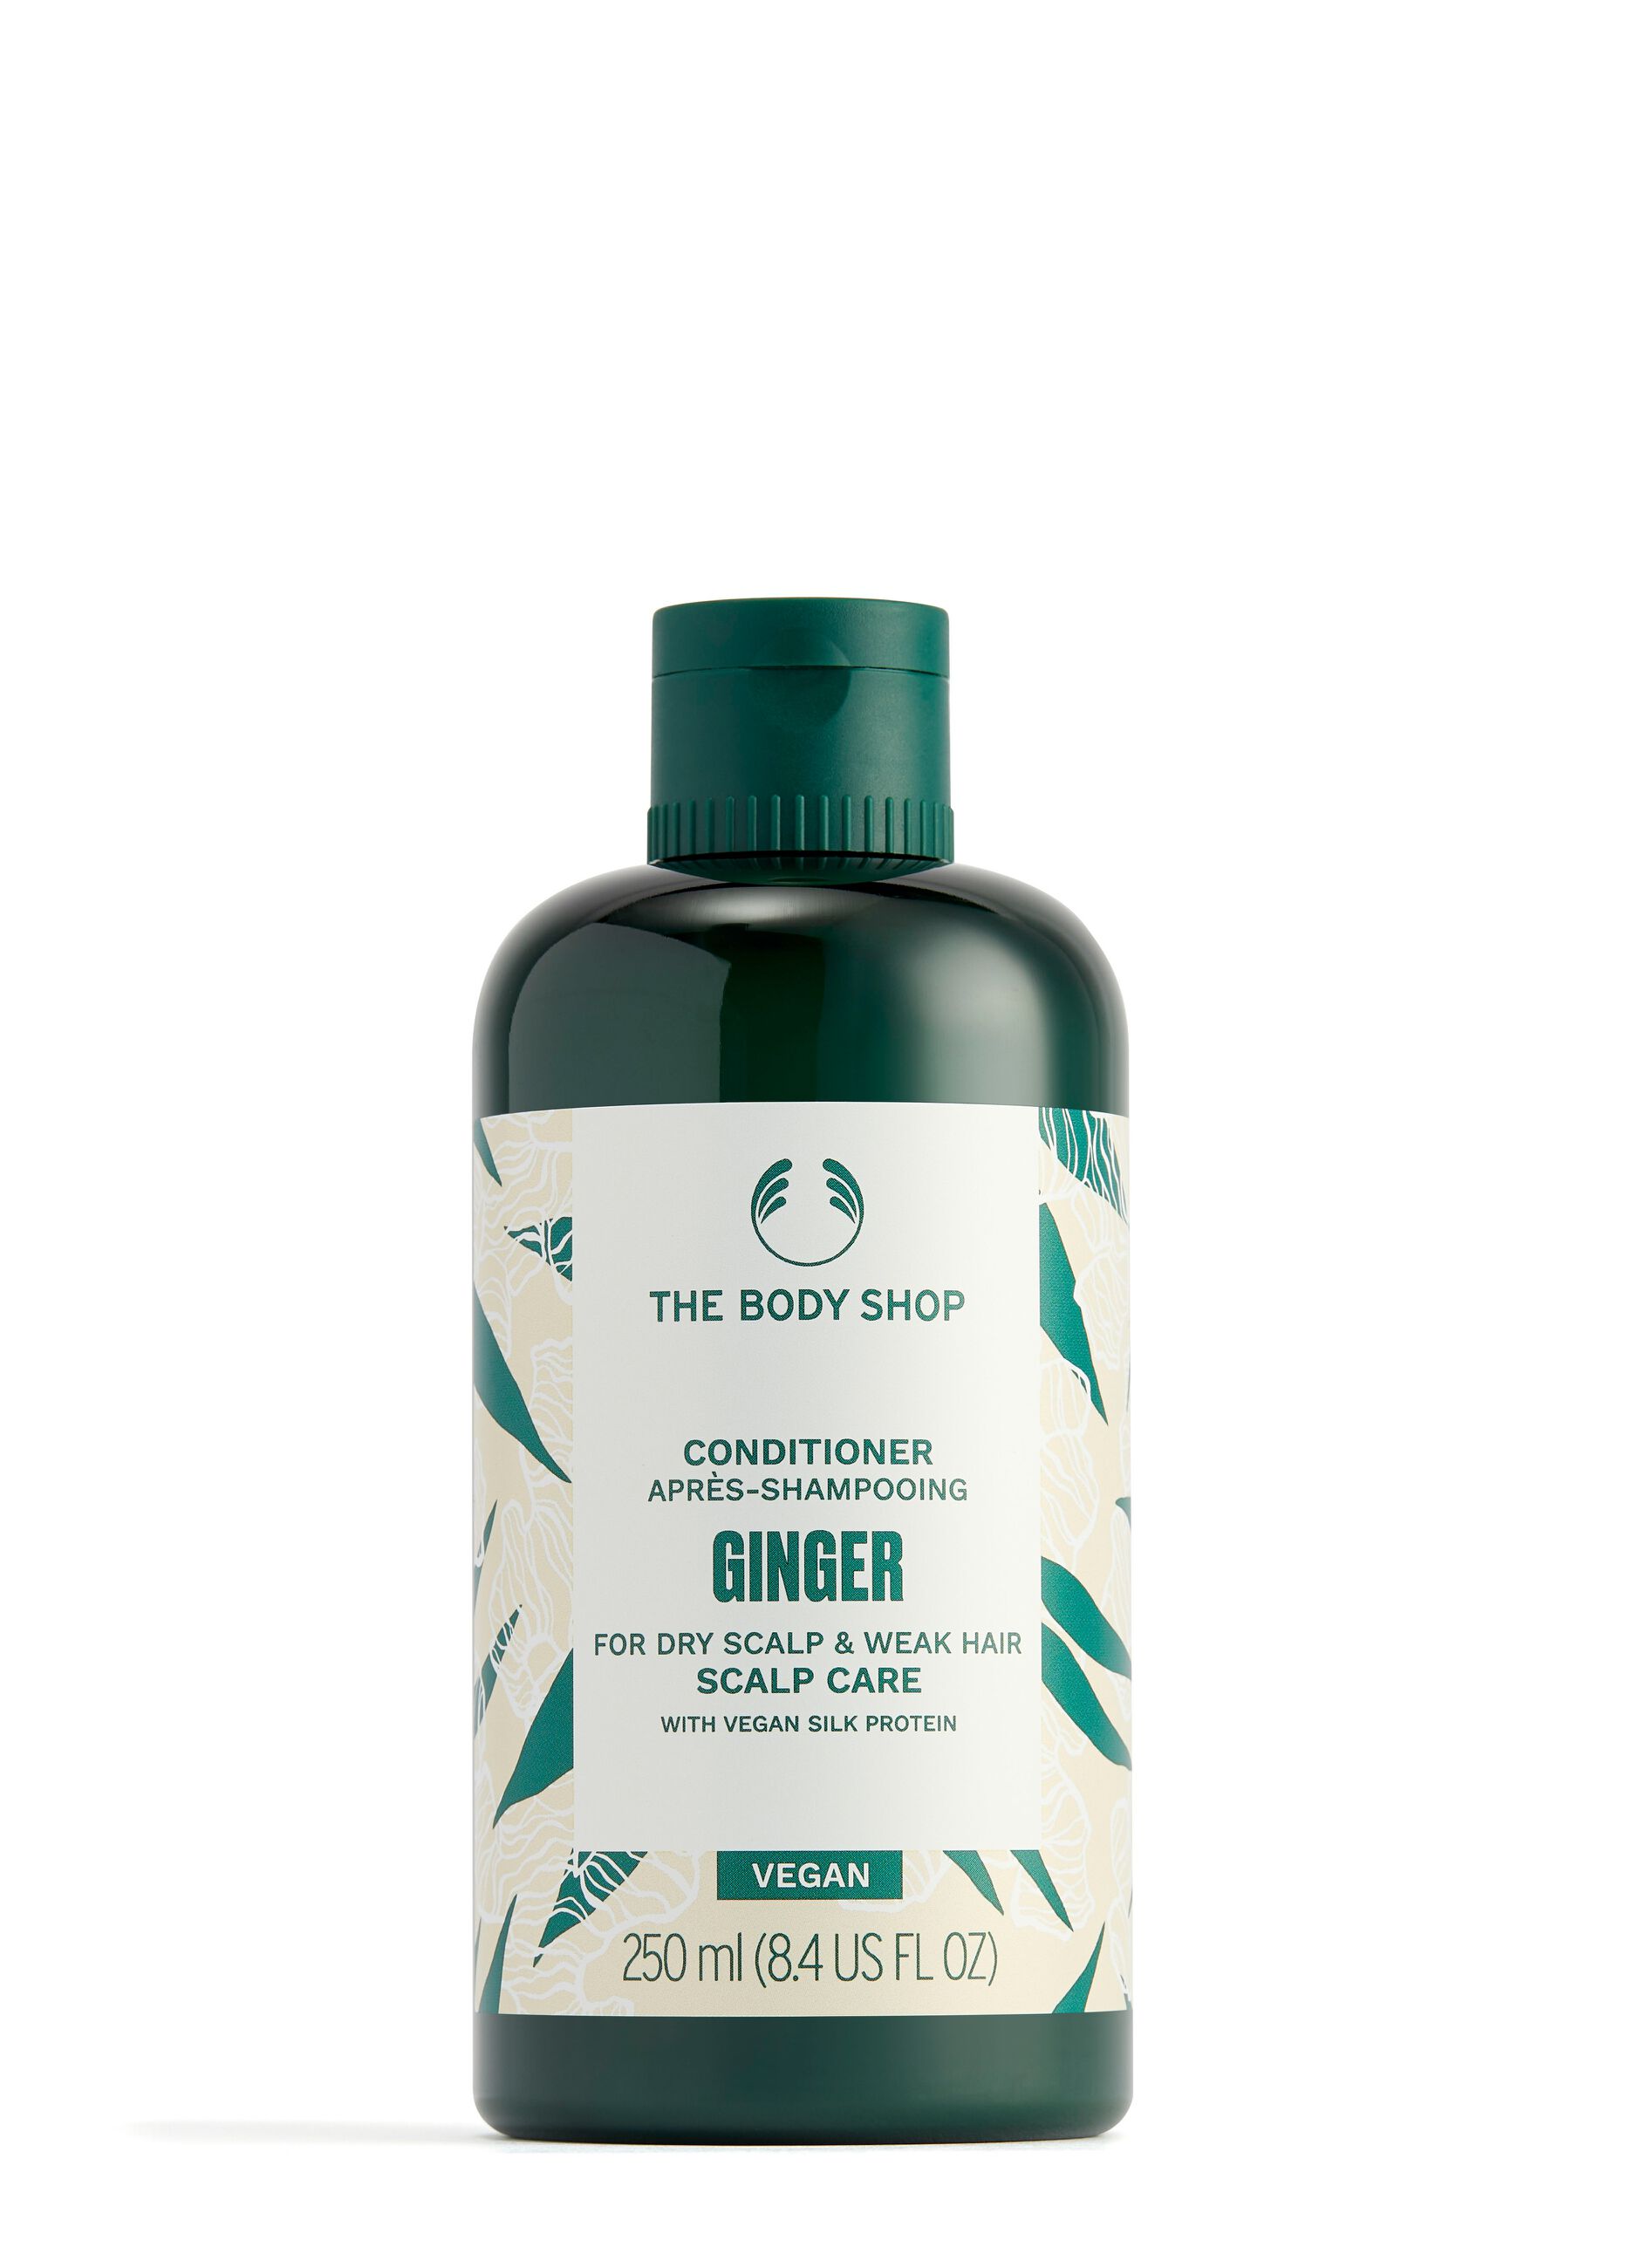 The Body Shop ginger conditioner for dry scalps 250ml